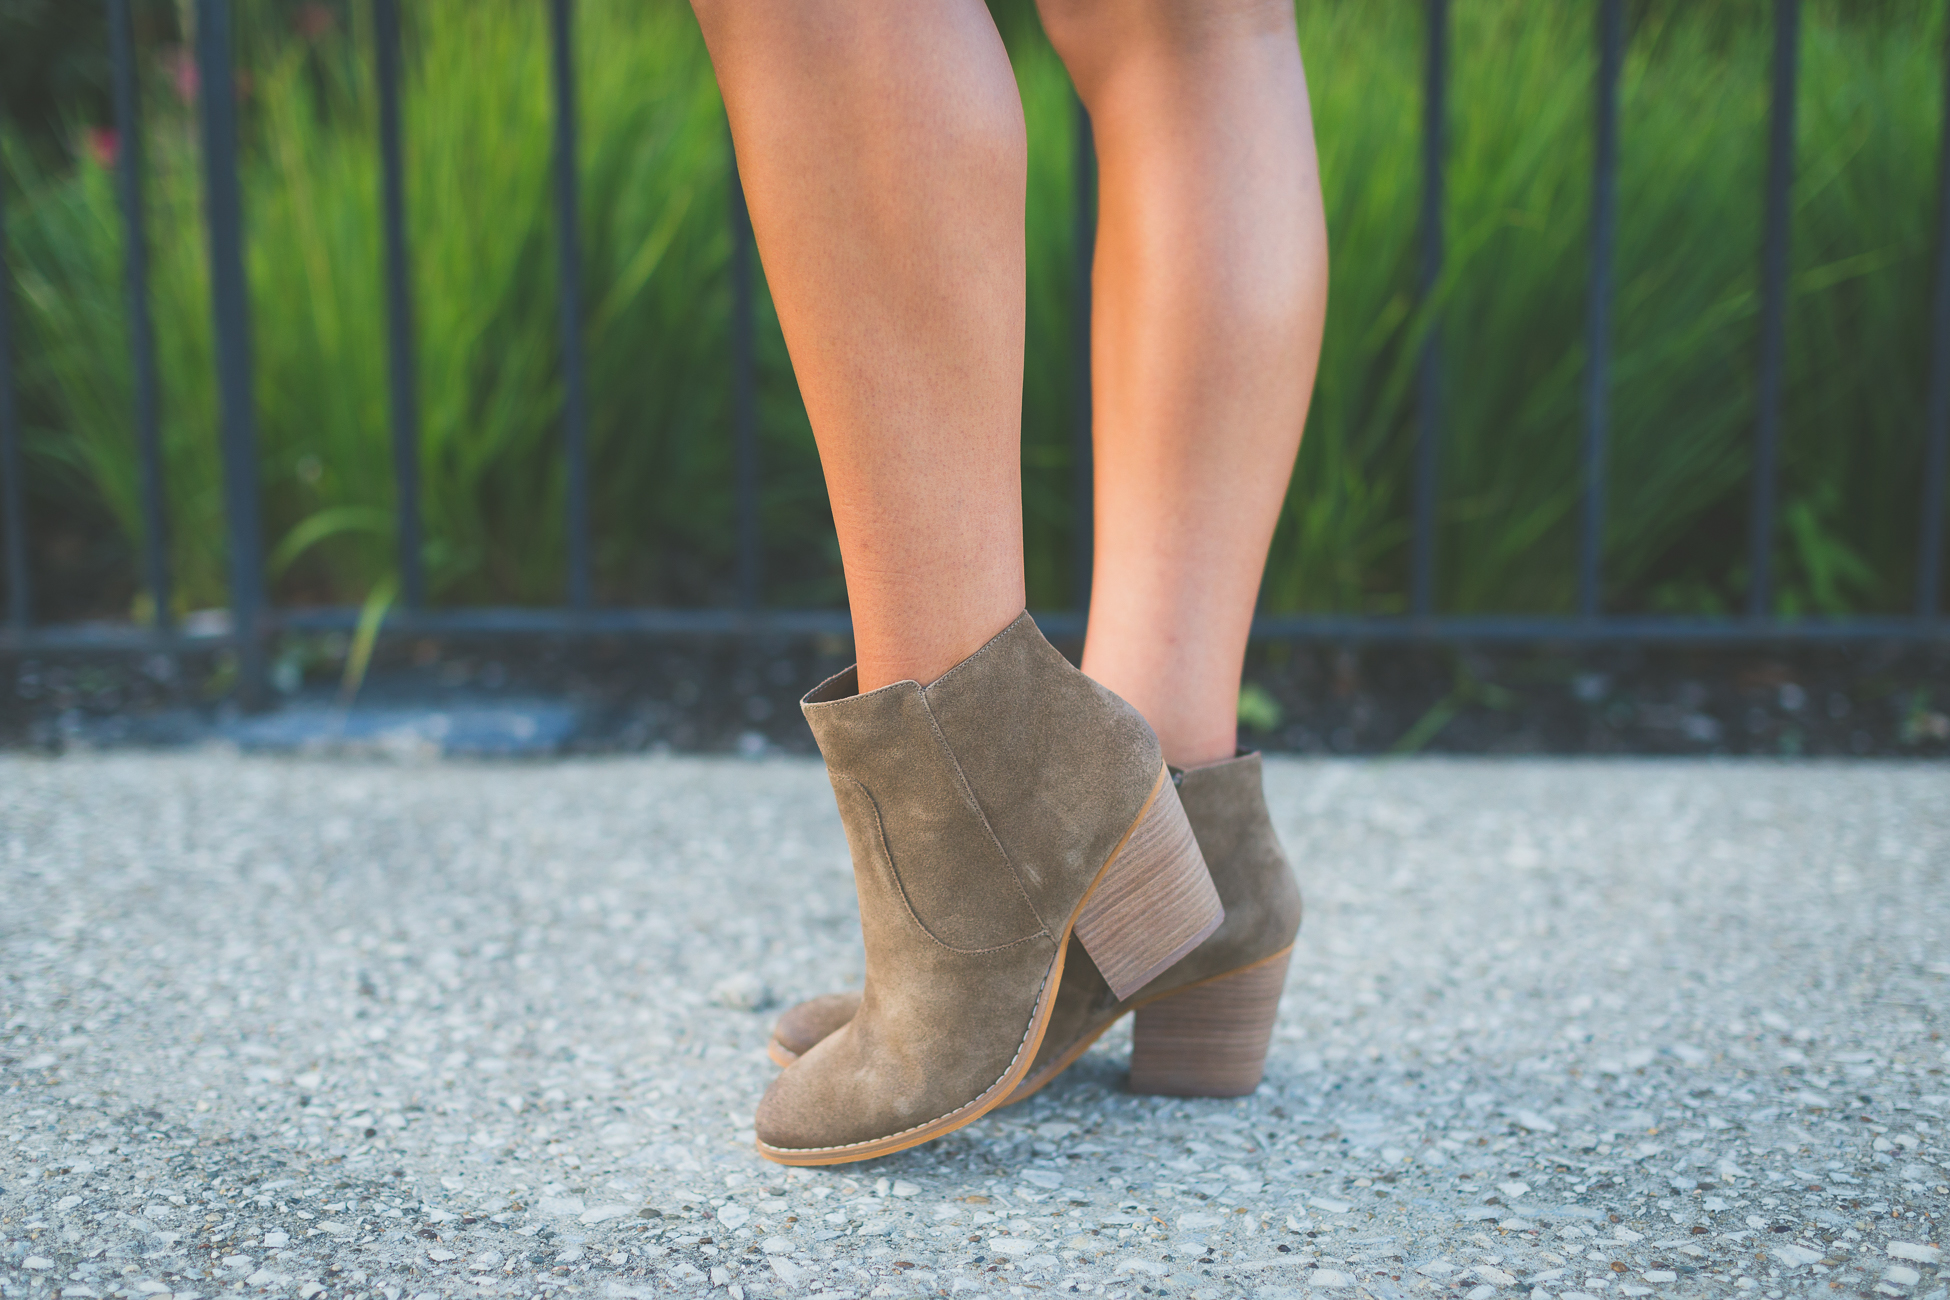 suede booties, fall booties, best fall booties, treasure and bond booties, sale booties, nordstrom anniversary sale fall clothes, nordstrom anniversary sale public access, shop nordstrom, nordstrom shoes, nordstrom dresses, nordstrom handbag sale, nordstrom anniversary sale dates, Nordstrom Anniversary Sale 2016, nordstrom anniversary sale picks, nordstrom anniversary sale catalog, sale picks for nordstrom anniversary sale 2016, information on nordstrom anniversary sale // grace wainwright a southern drawl